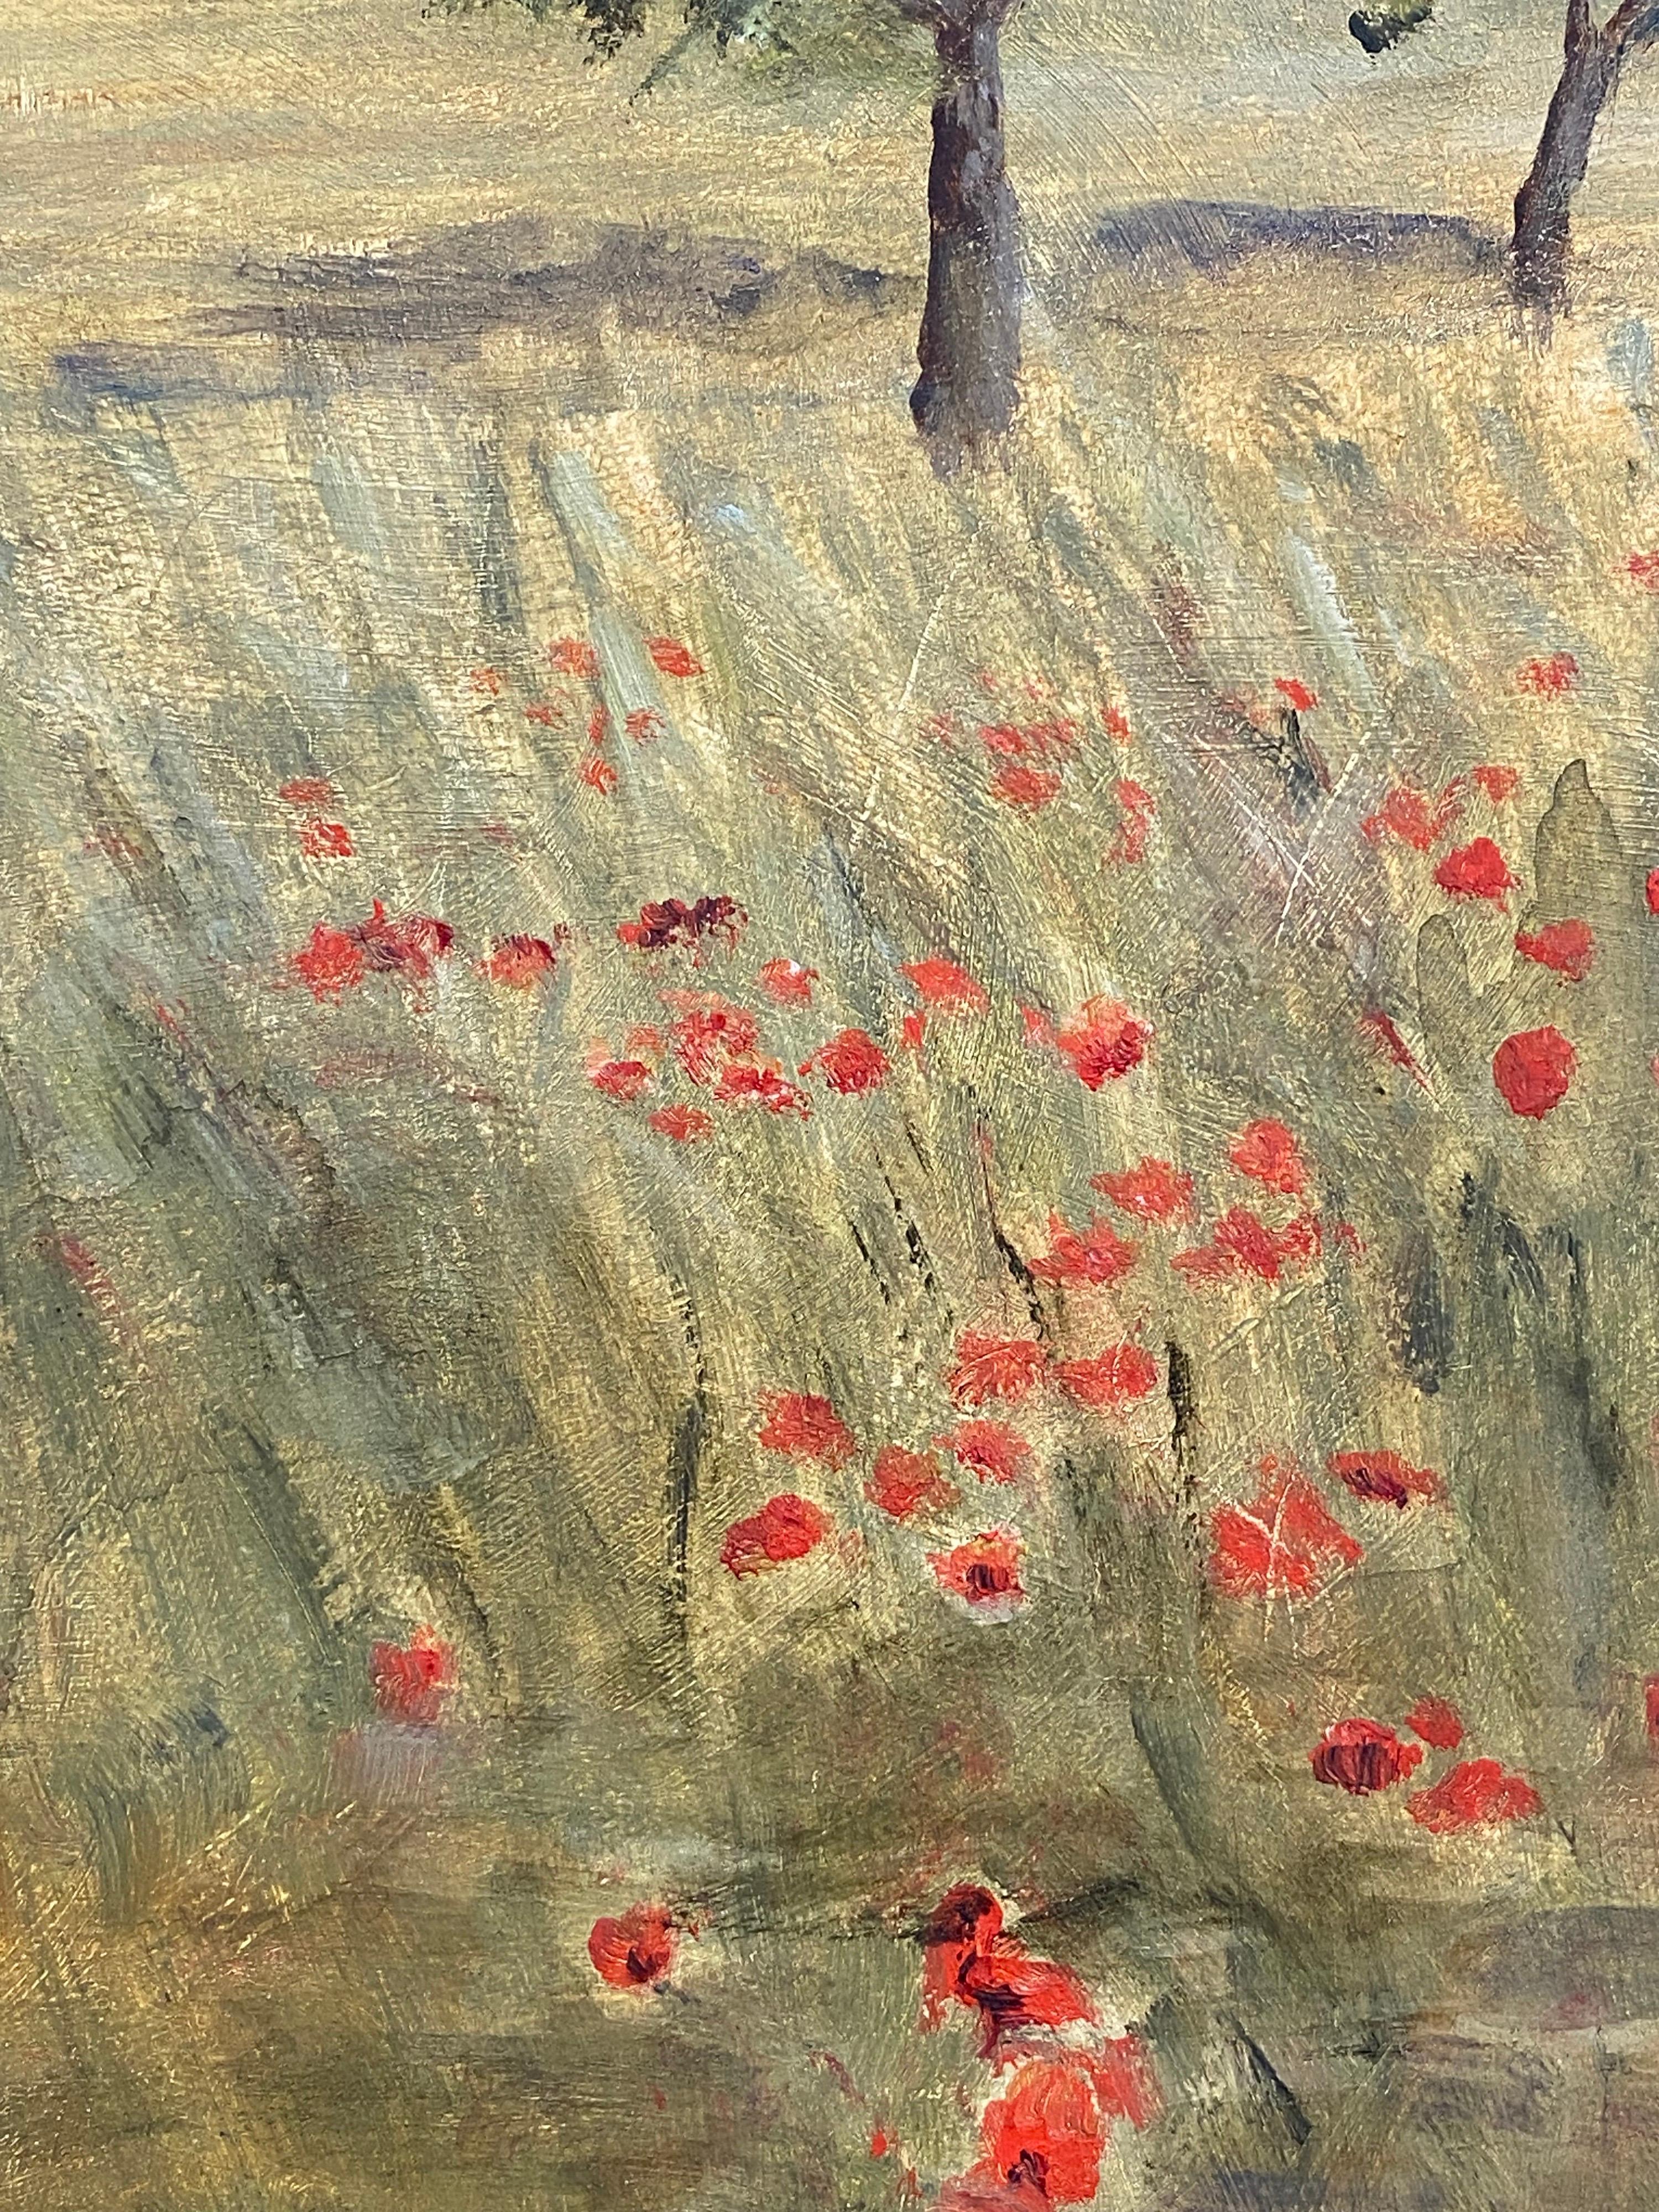 Artist/ School: French Impressionist, 20th century

Title: Poppy Fields

Medium: oil painting on board, unframed .

Size: : 12 x 9.5 inches

Provenance: private collection, France

Condition: The painting is in overall very good and pleasing